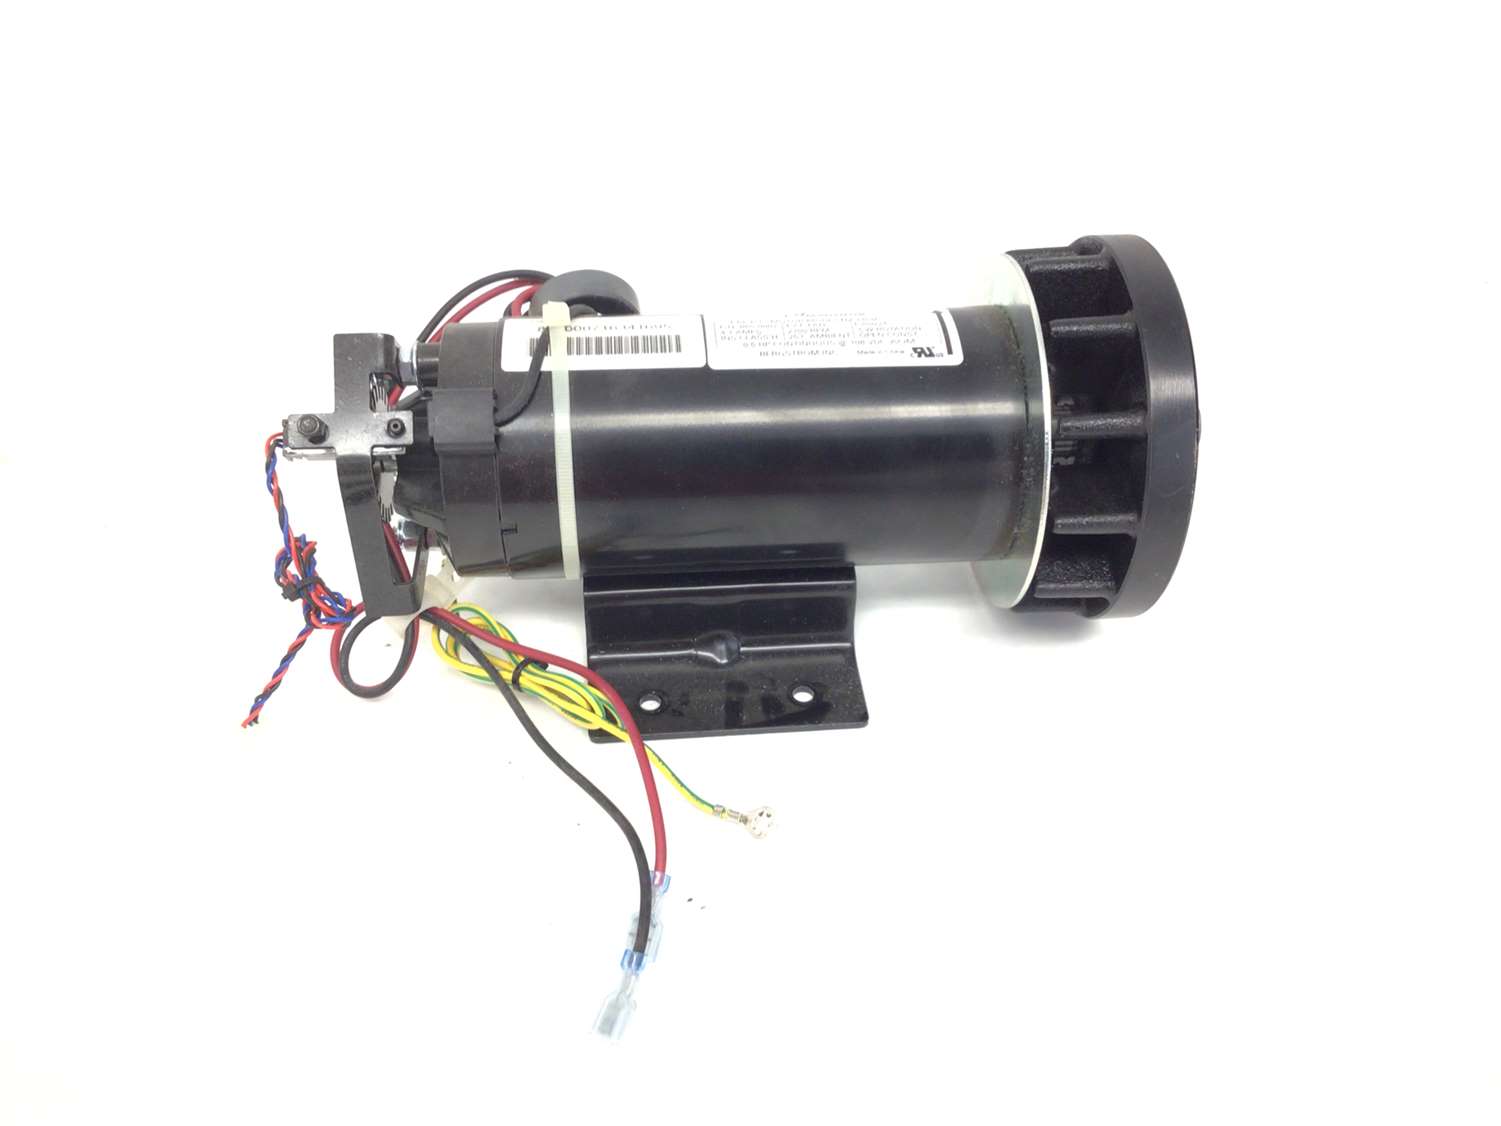 Motor Replacement Kit (Used)